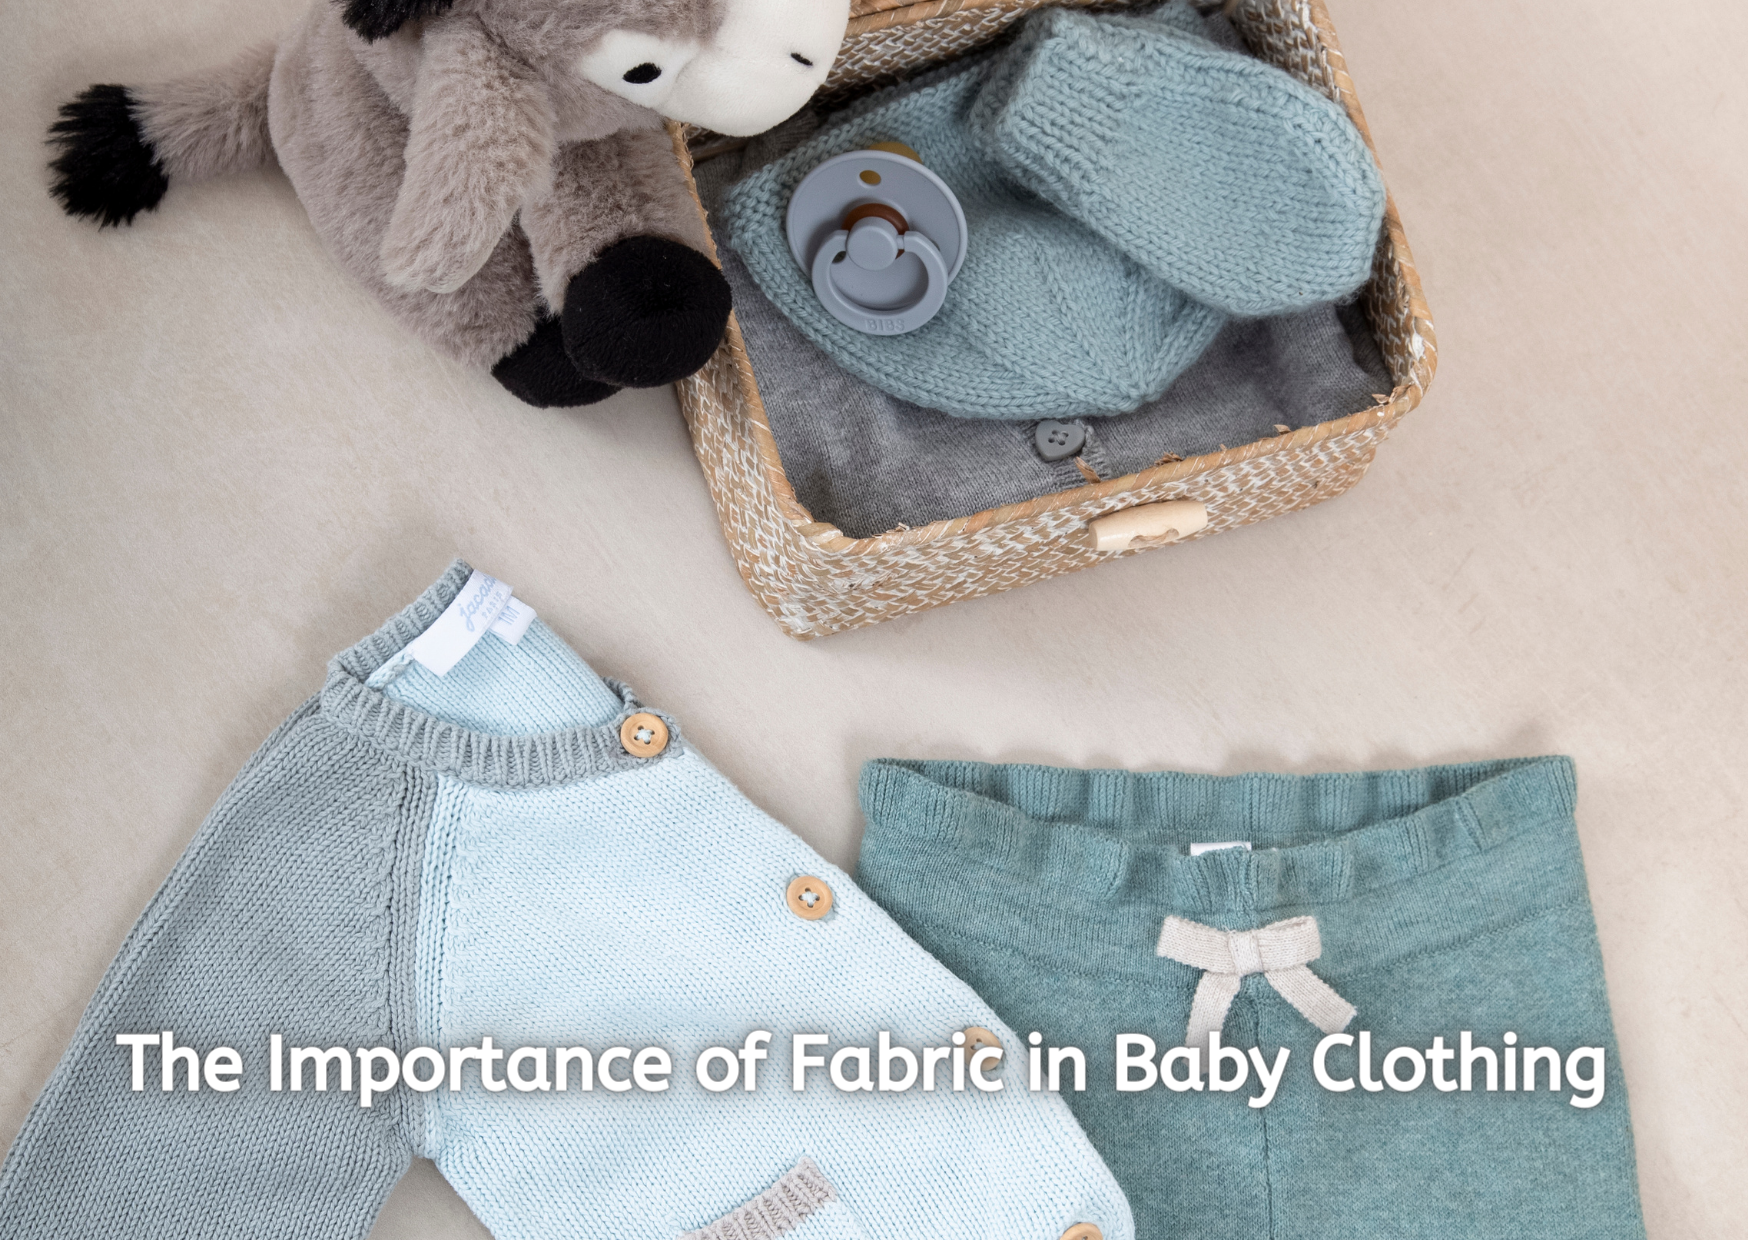 The Importance of Fabric in Baby Clothing